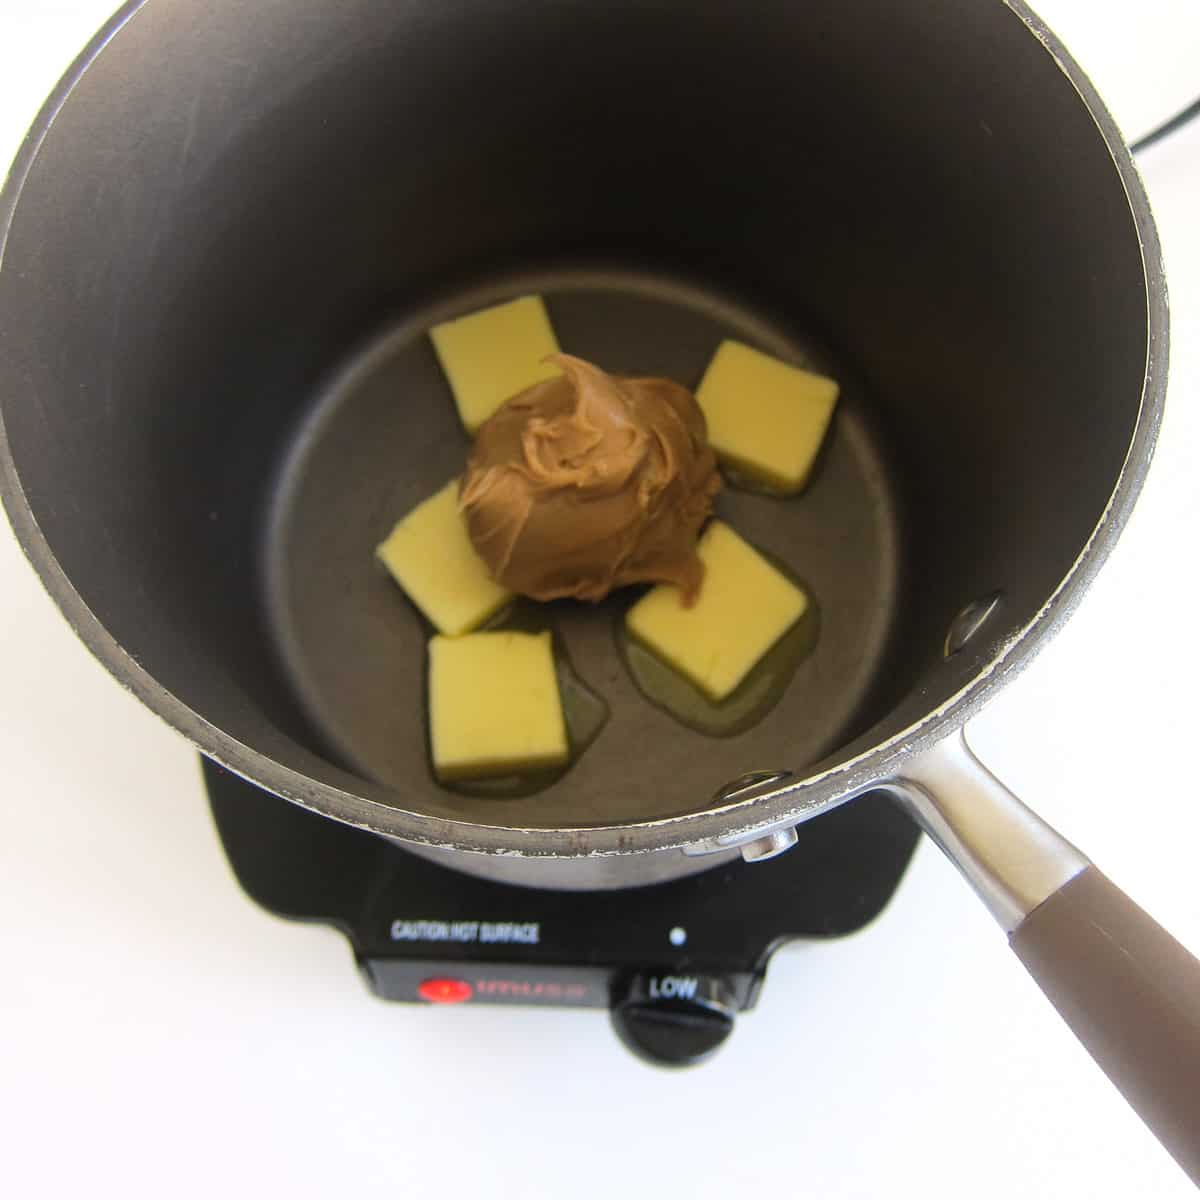 heat butter and peanut butter in a saucepan over low heat